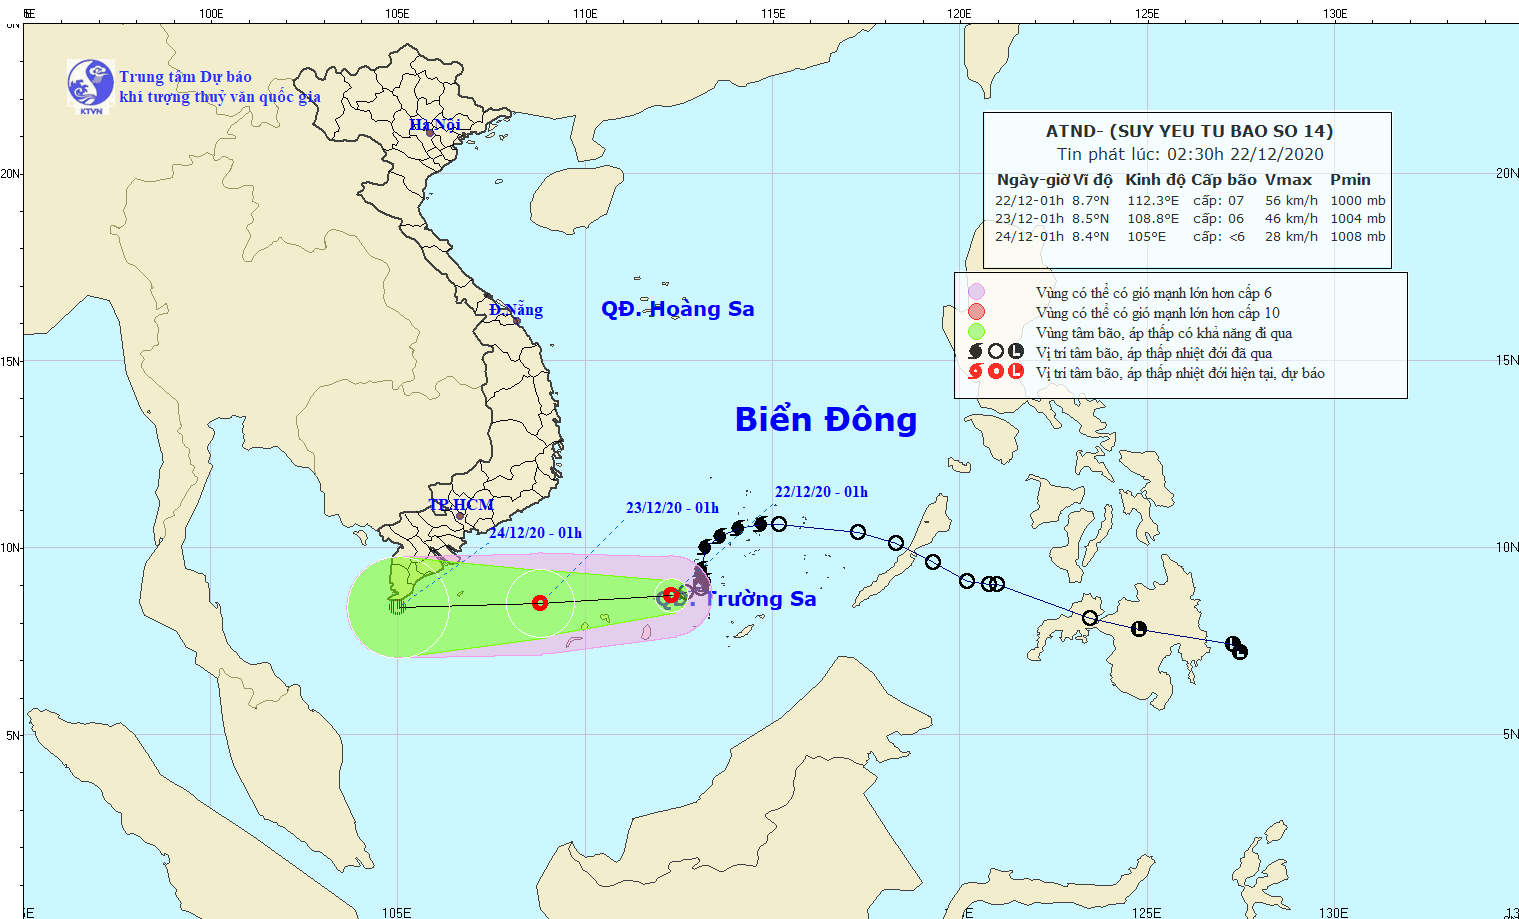 Path map of tropical depression is provided by the National Center for Hydro-meteorology Forecasting